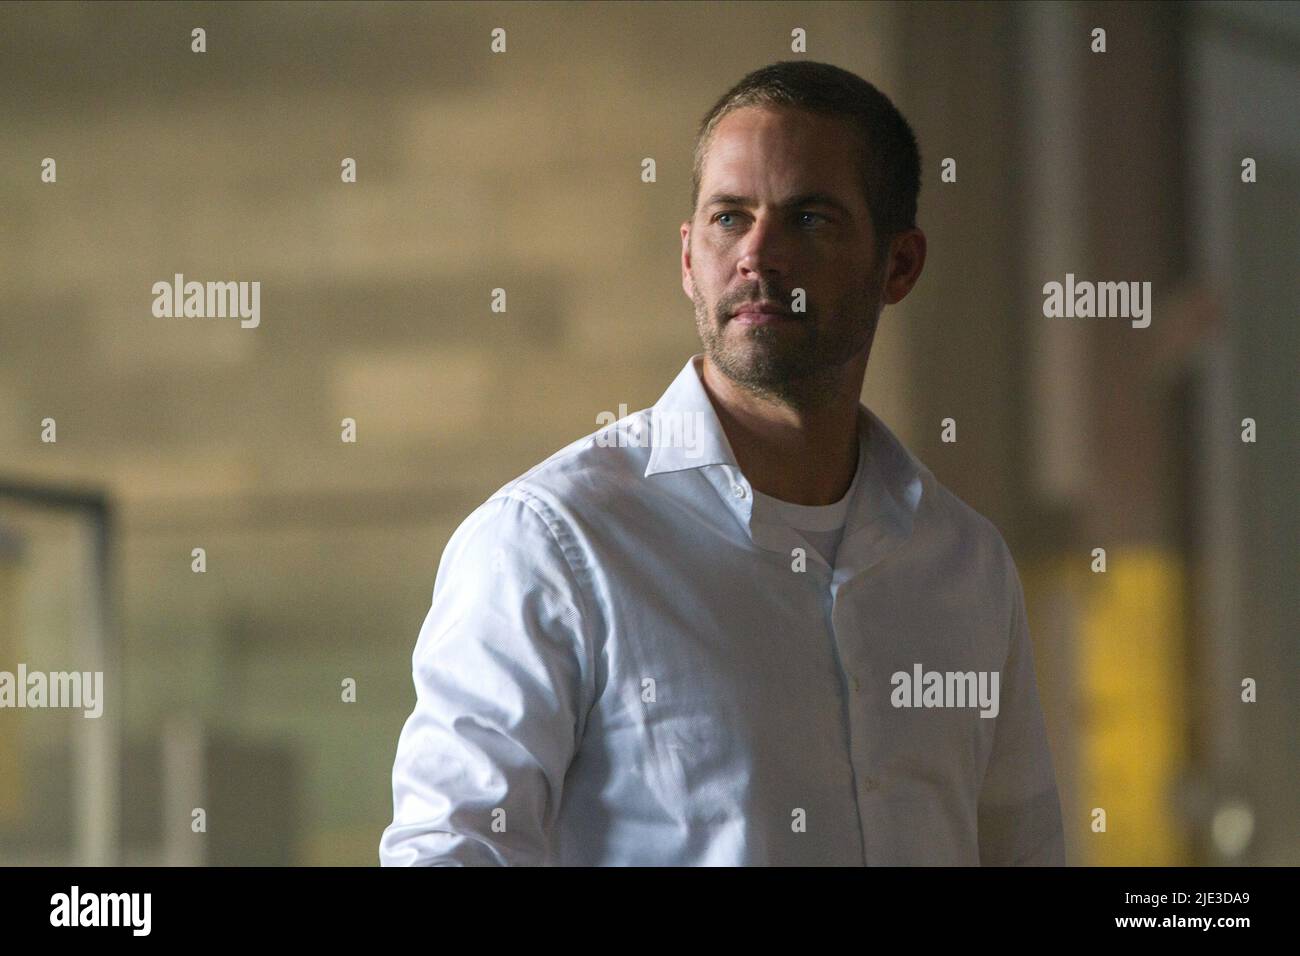 PAUL WALKER, FAST and FURIOUS 7, 2015 Stock Photo